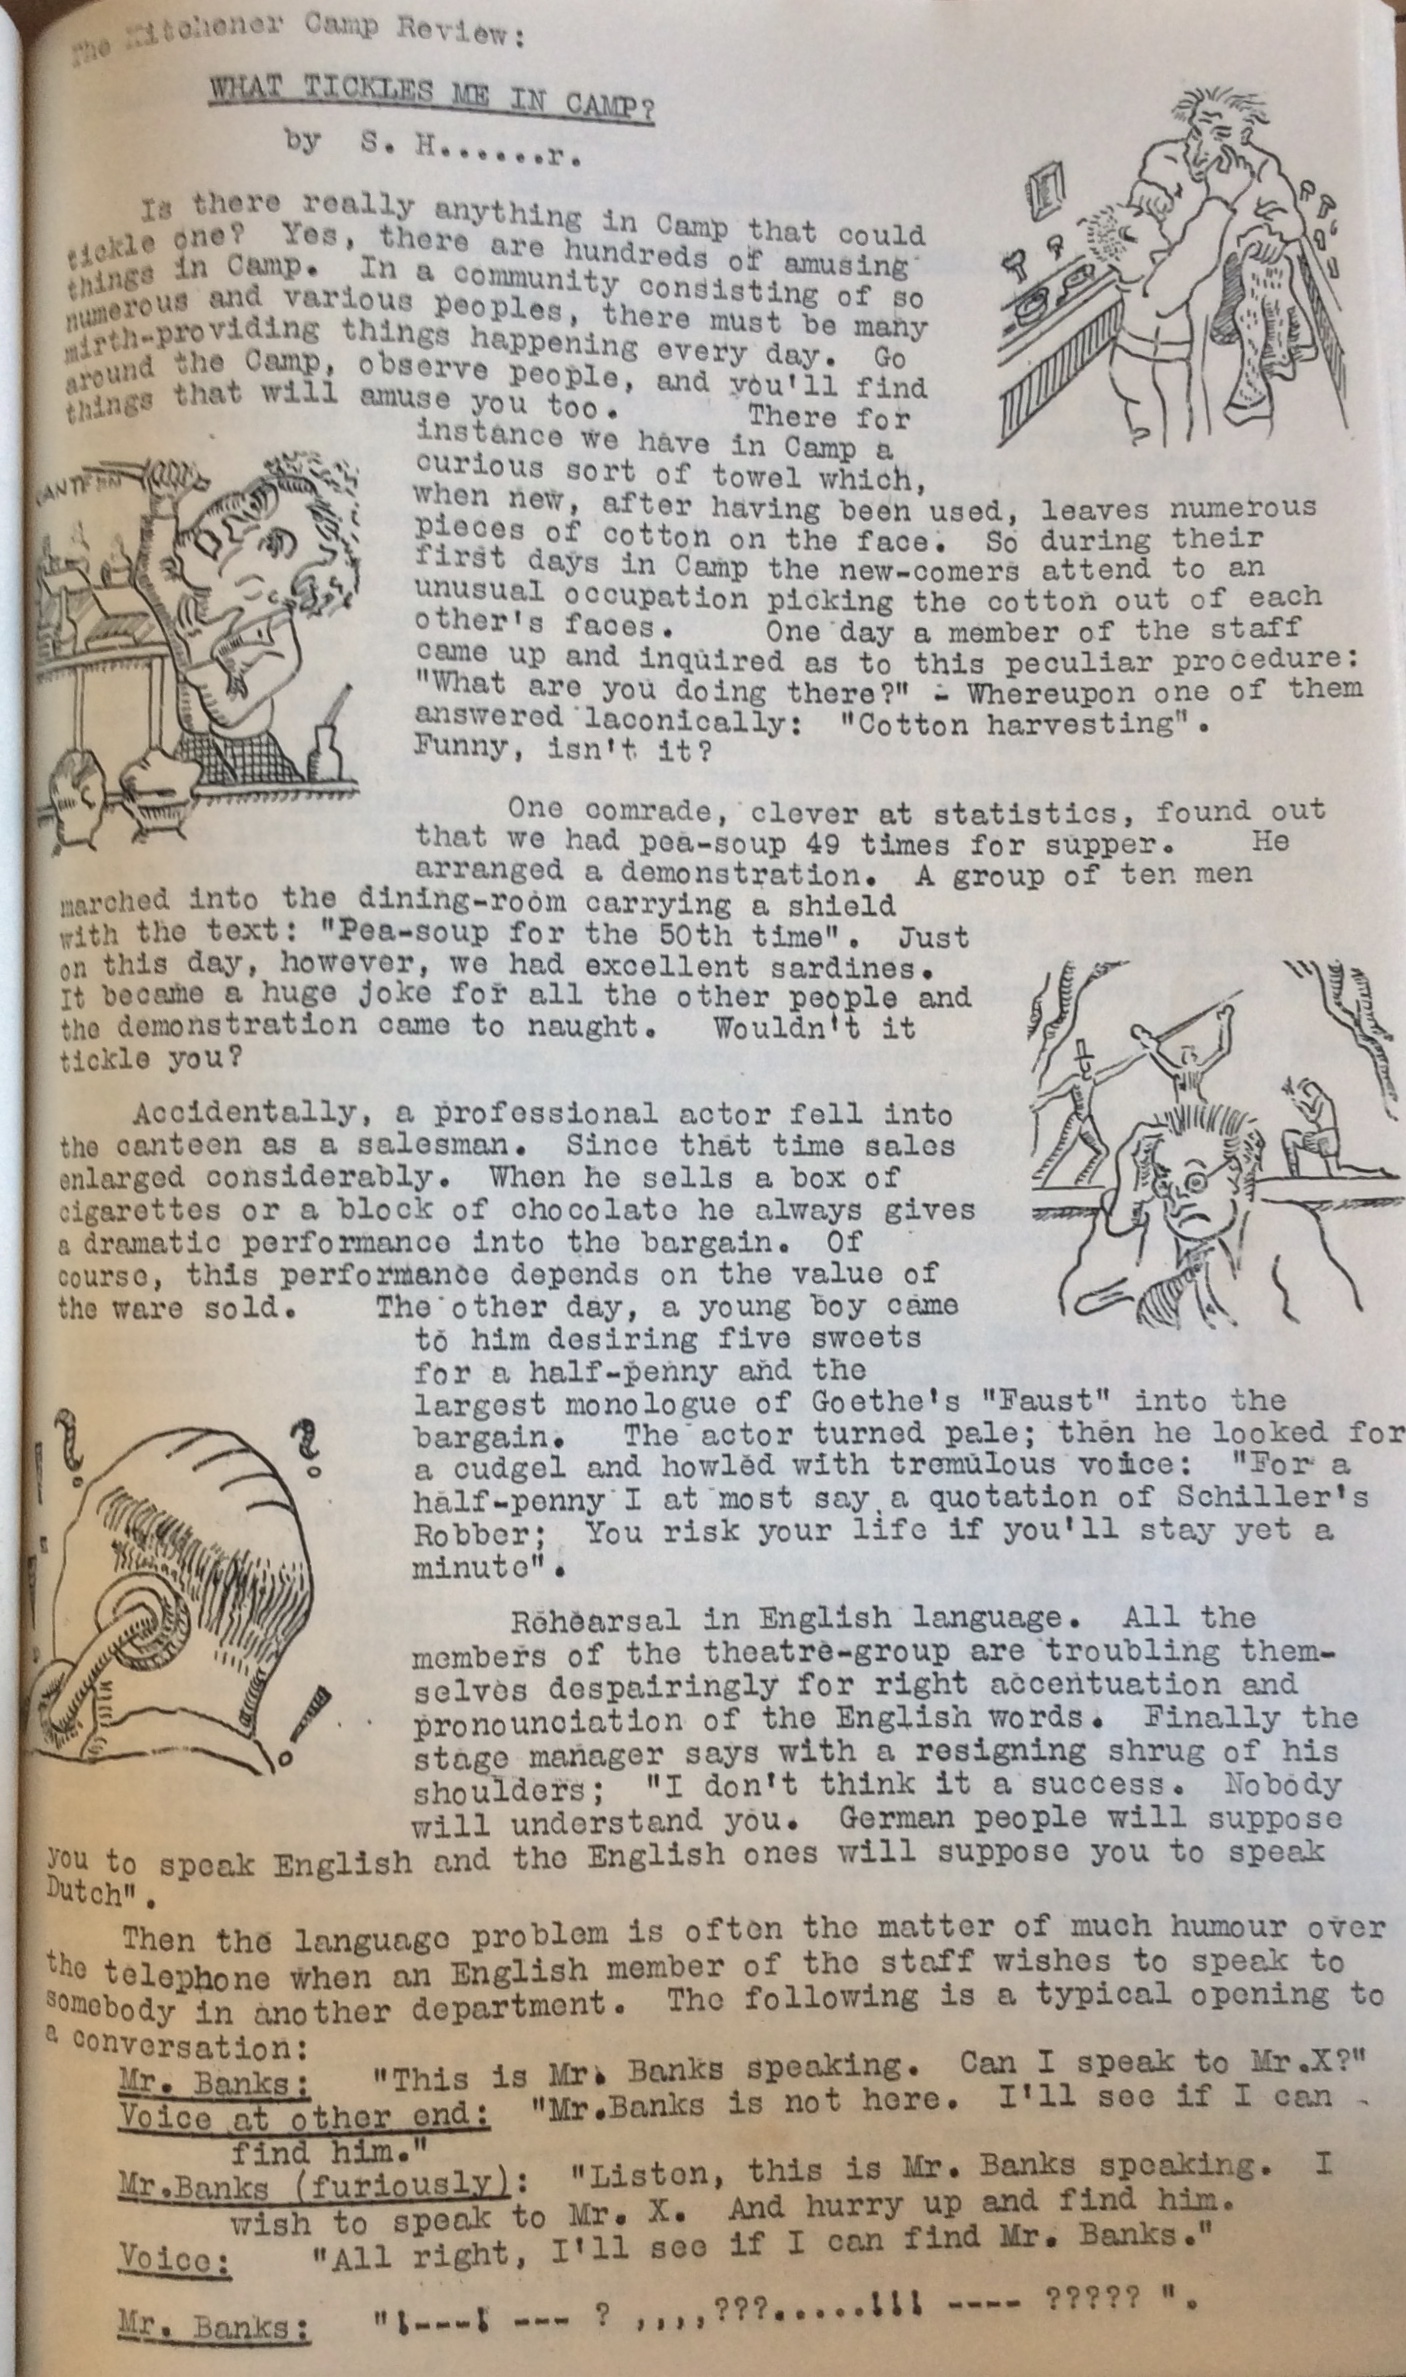 Kitchener Camp Review, June 1939, page 14